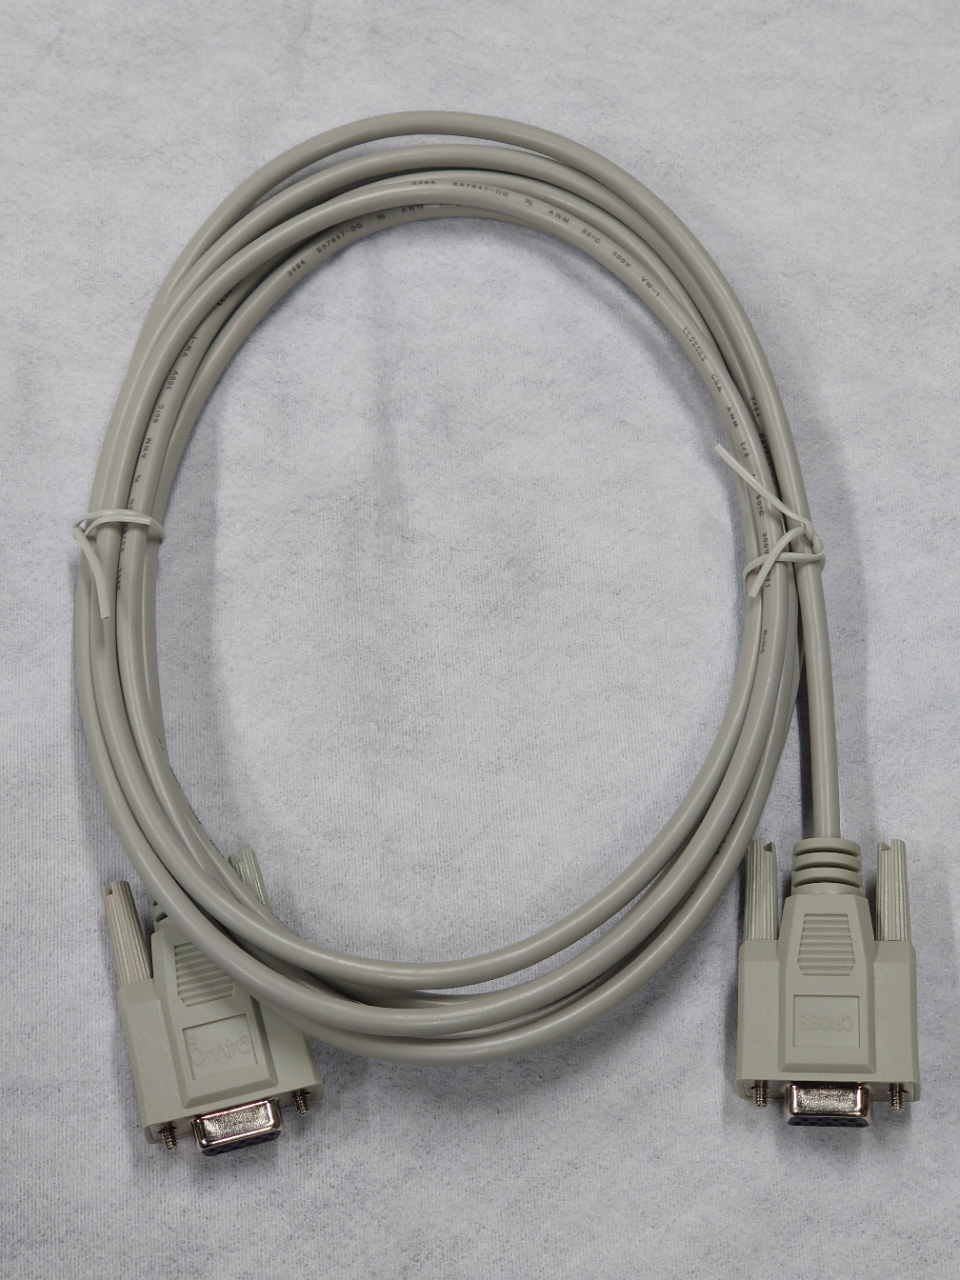 NULL MODEM CABLE DB9 Female to DB9 Female